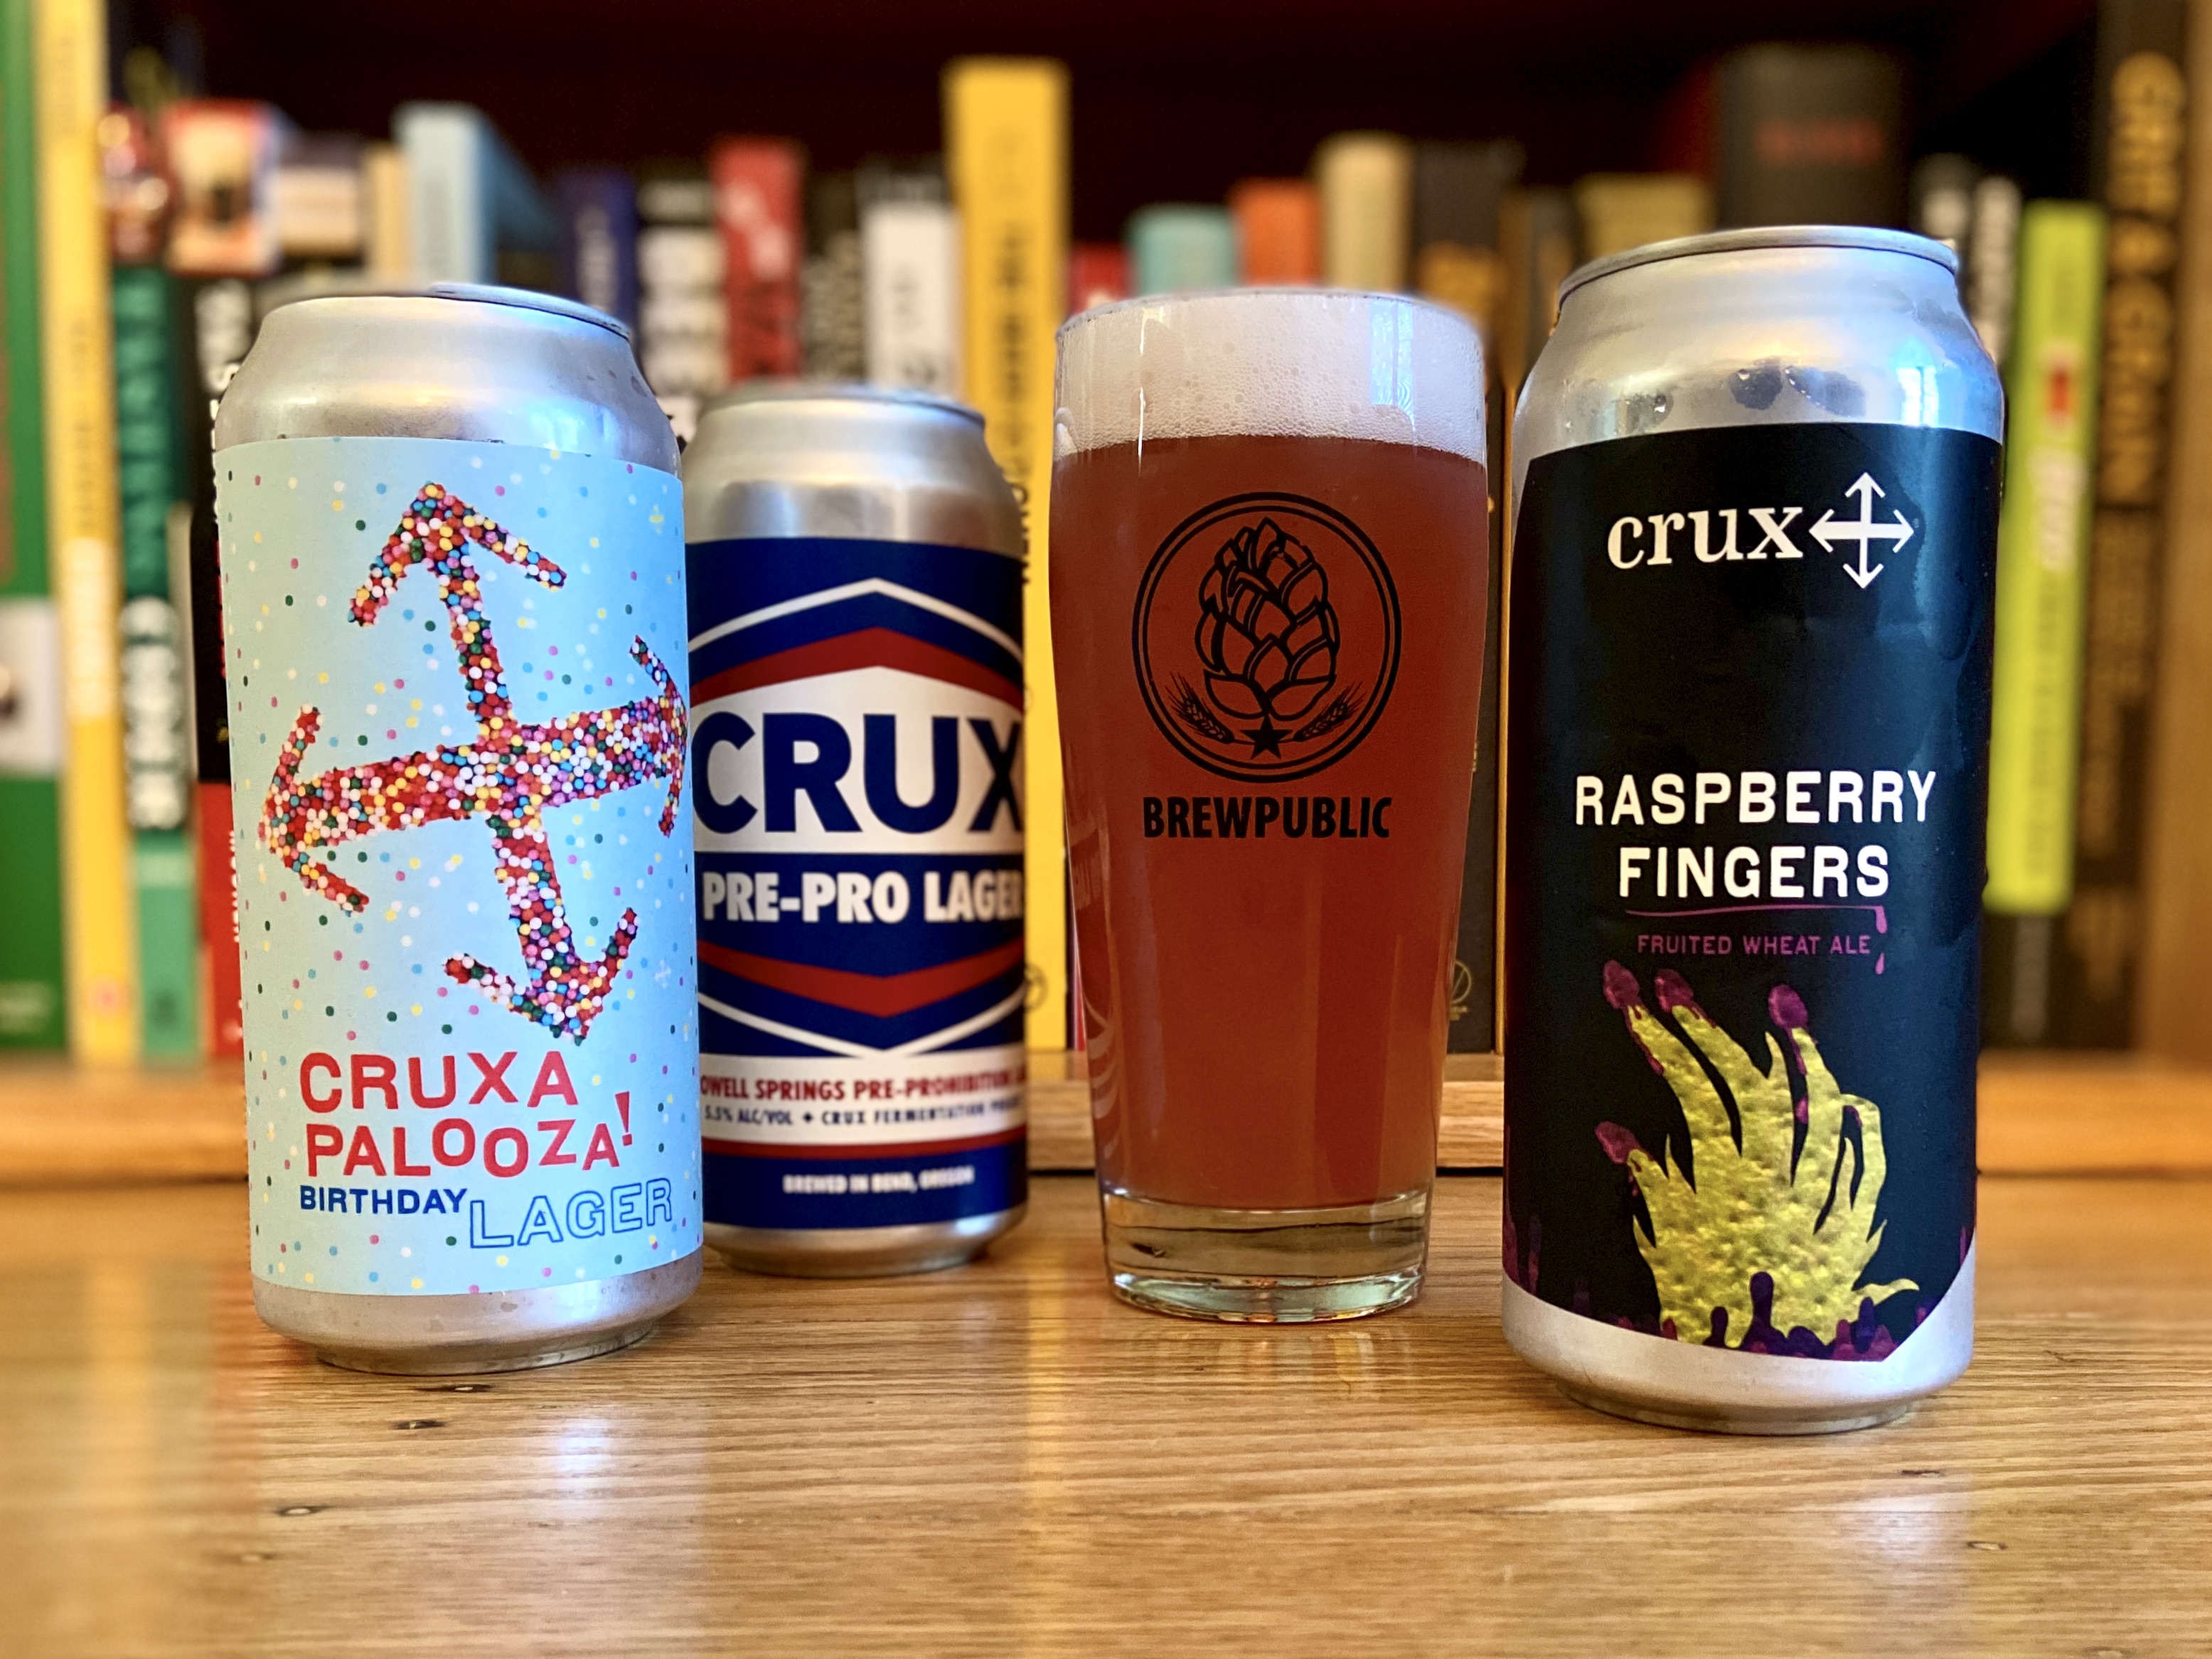 Crux Fermentation Project releases Rapberry Fingers, Crux Pre-Pro Lager, and Cruxapalooza Birthday Lager in 16oz cans.